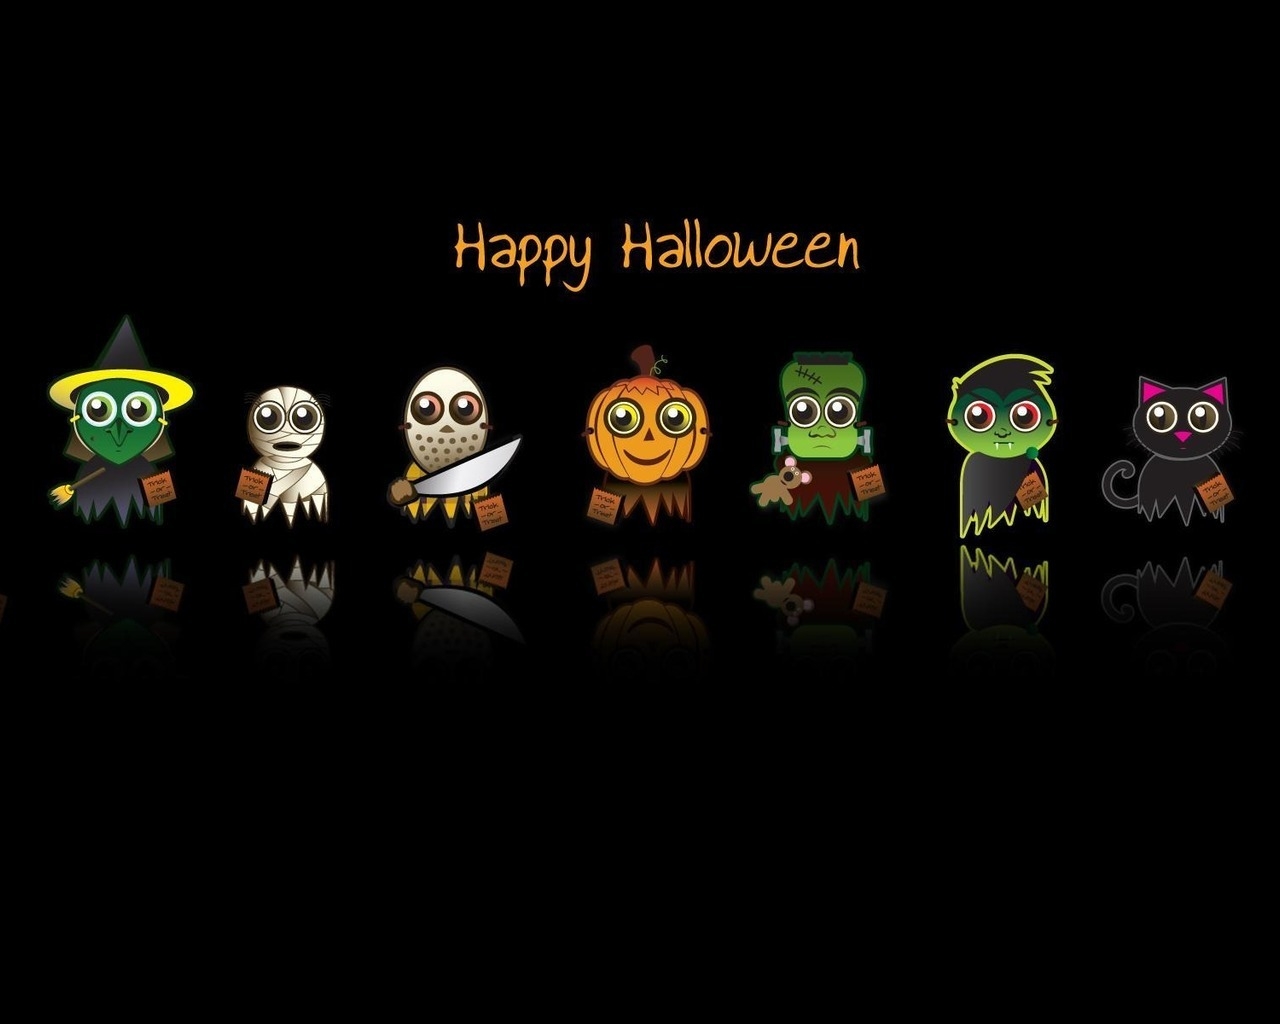 Happy Halloween Characters for 1280 x 1024 resolution